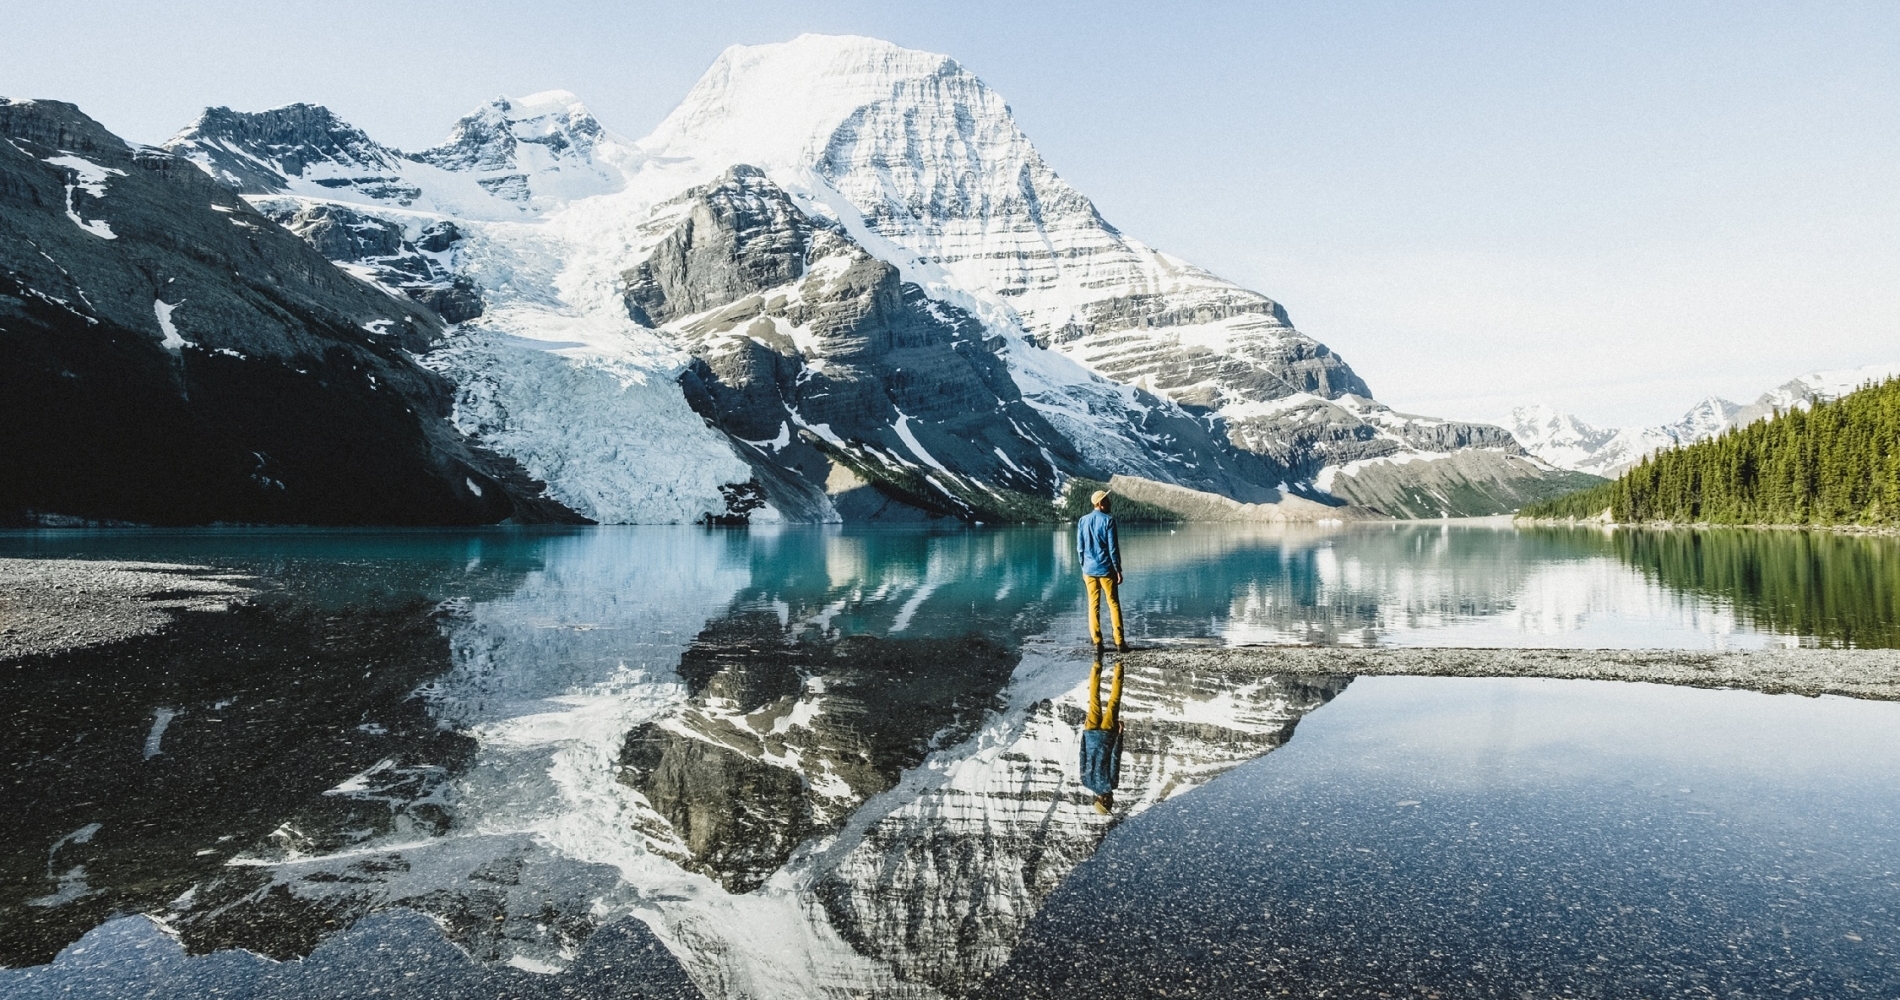 A person stands by a lake in Mount Robson Provincial Park